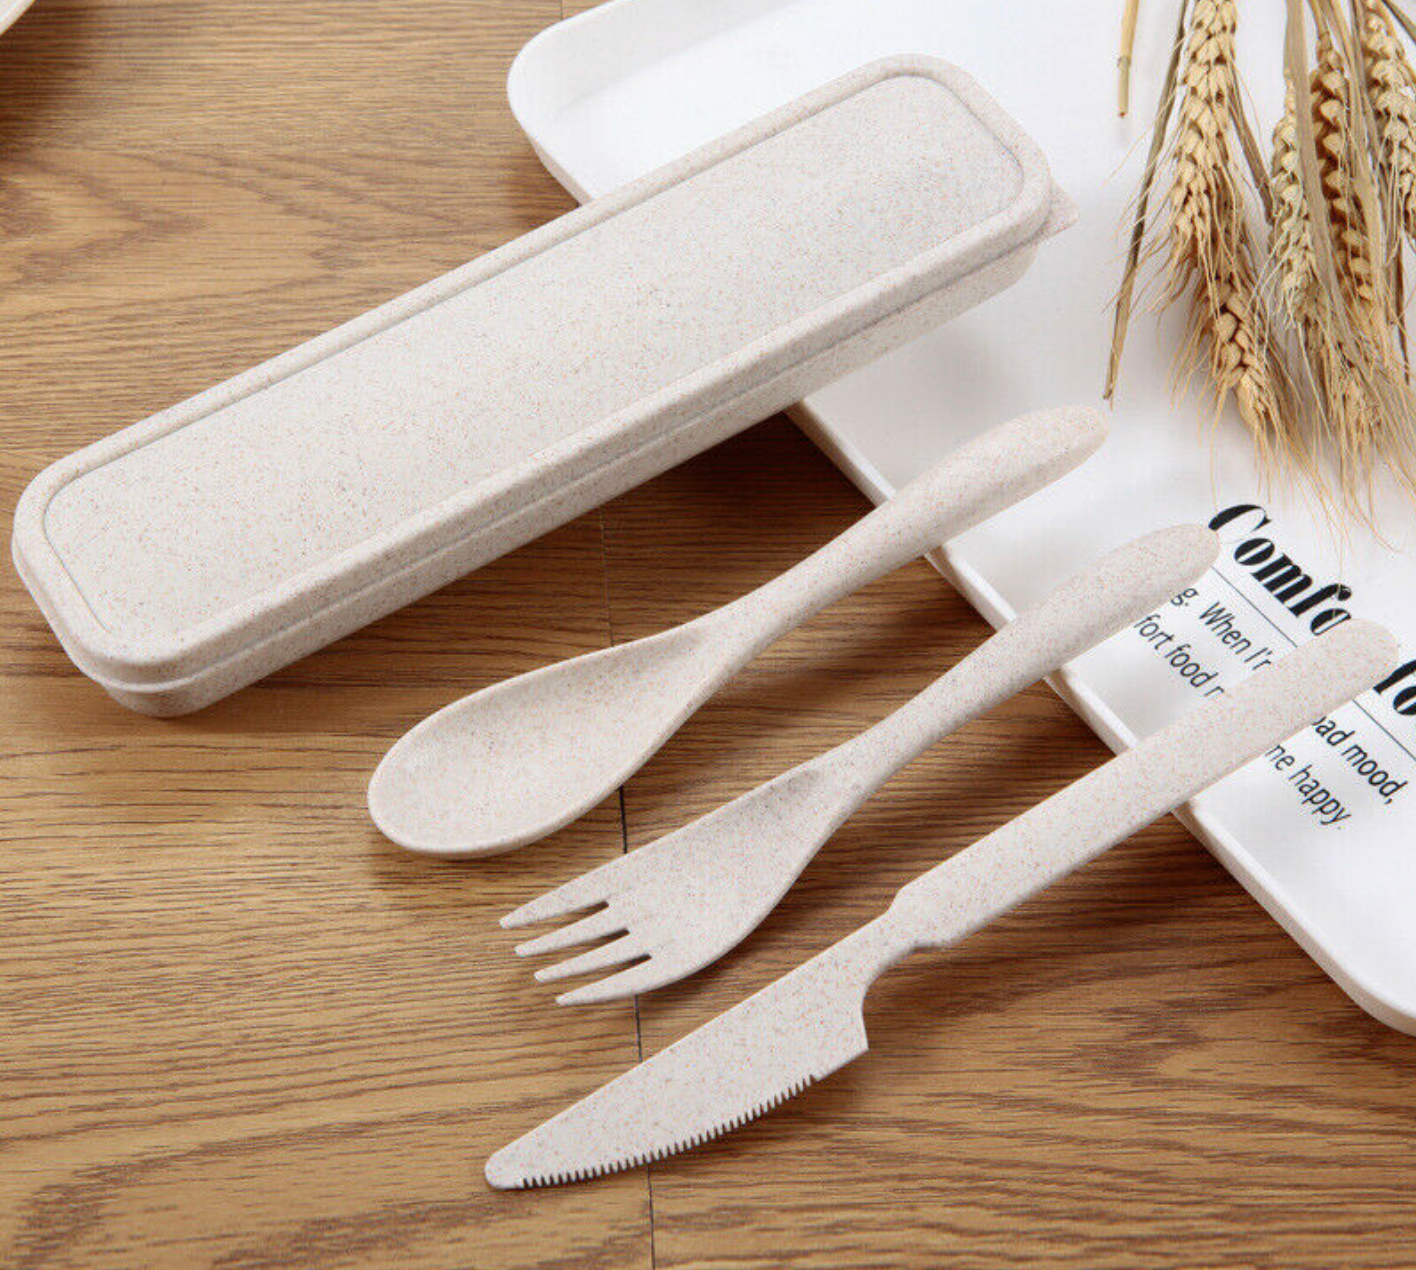 Totally Bamboo Take Along Reusable Utensil Set with Red Travel Case | Includes Bamboo Spoon, Fork, Knife | Dishwasher Safe